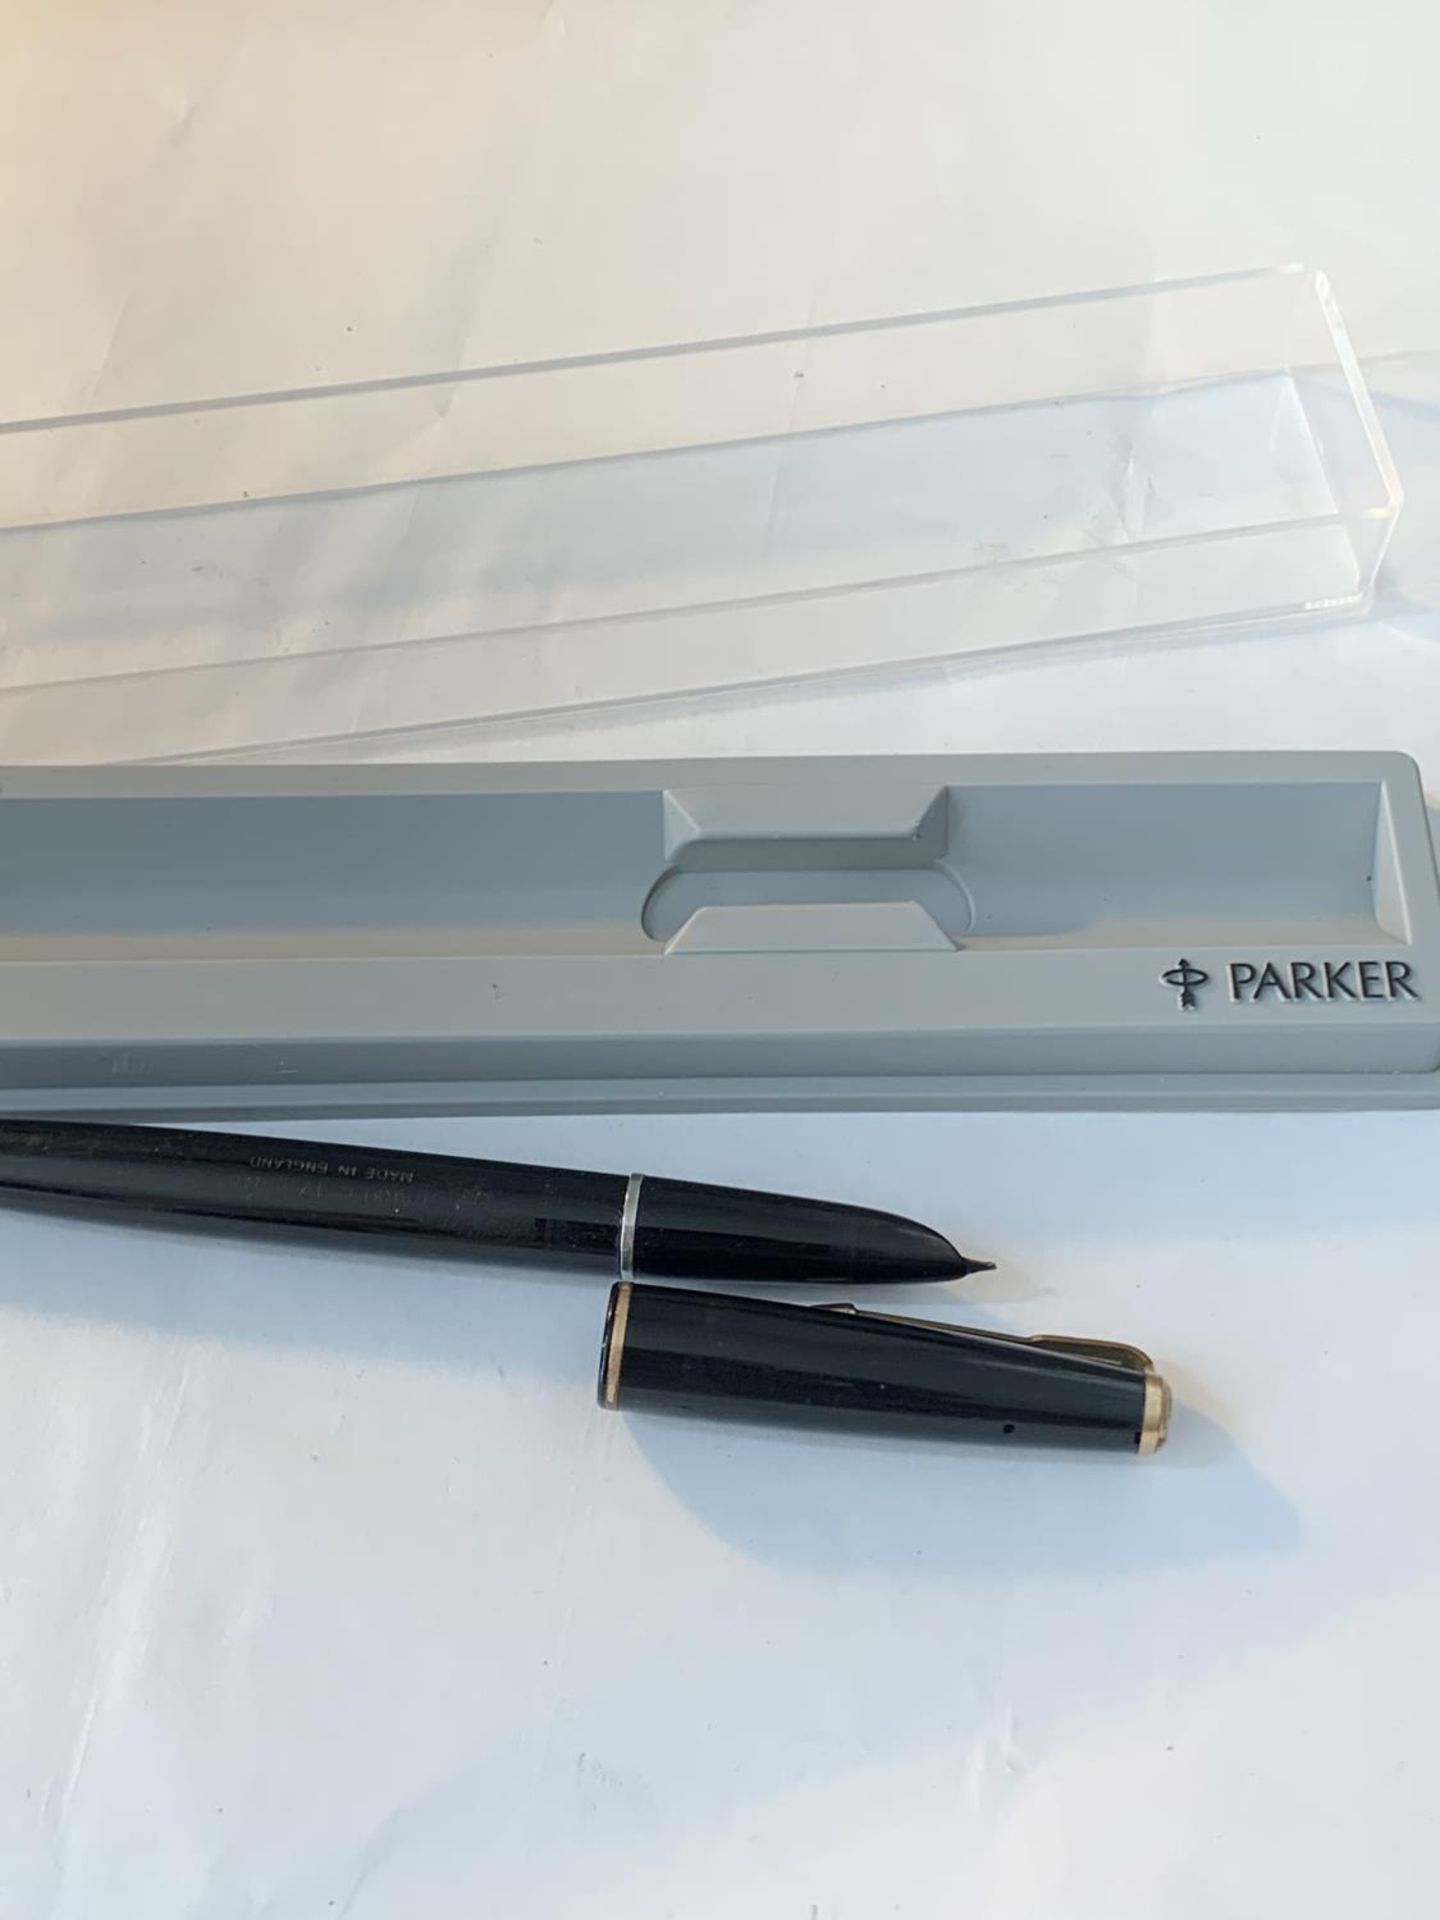 A PARKER FOUNTAIN PEN IN A PRESENTATION BOX - Image 2 of 2